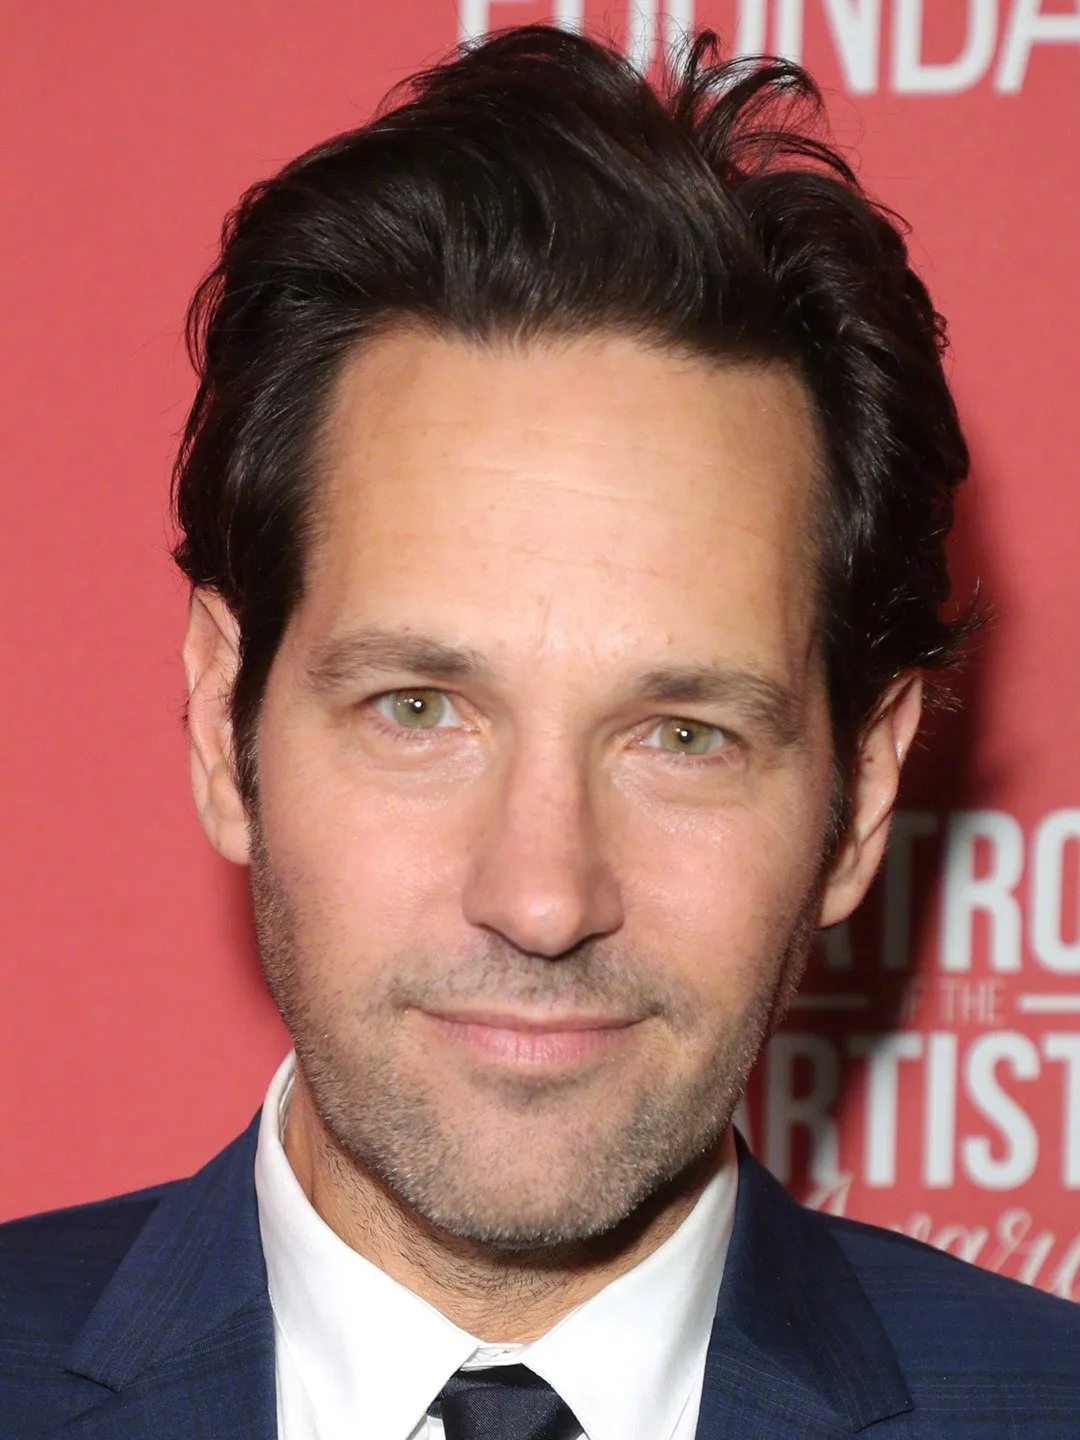 Paul Rudd to join Hulu hit series 'Only Murders in the Building Season 3' | FMV6